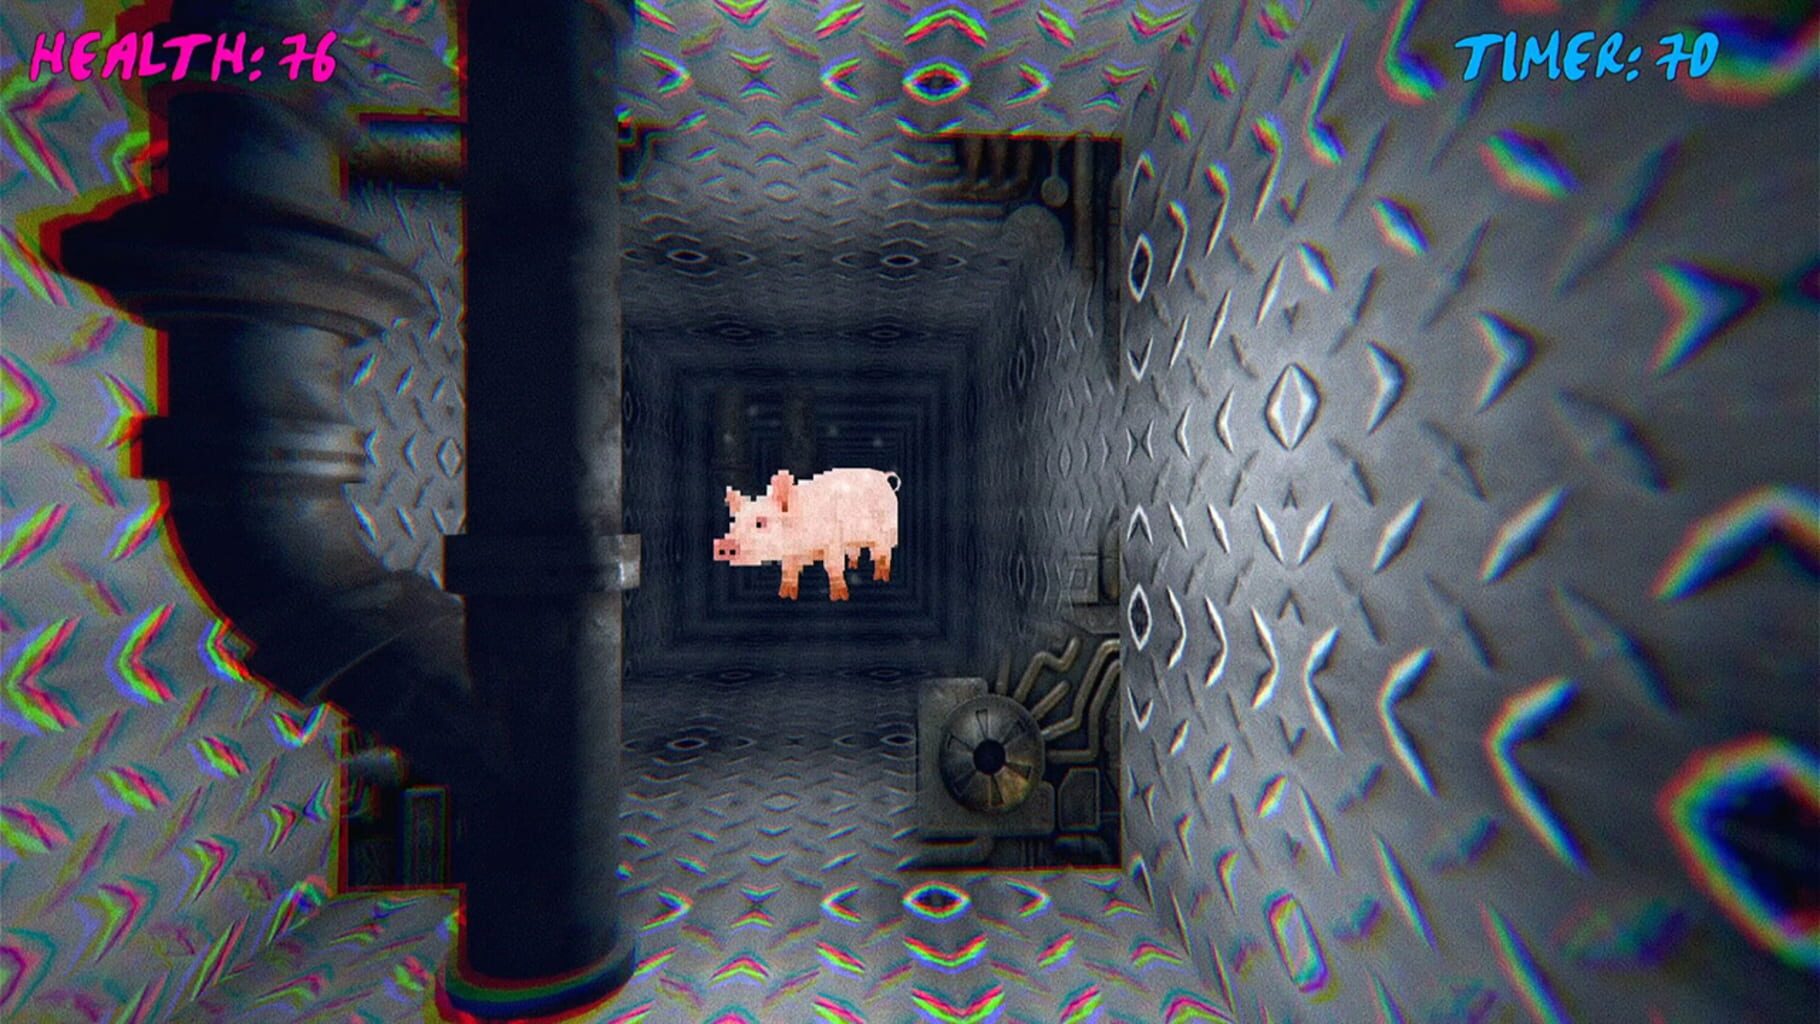 Hed the Pig screenshot